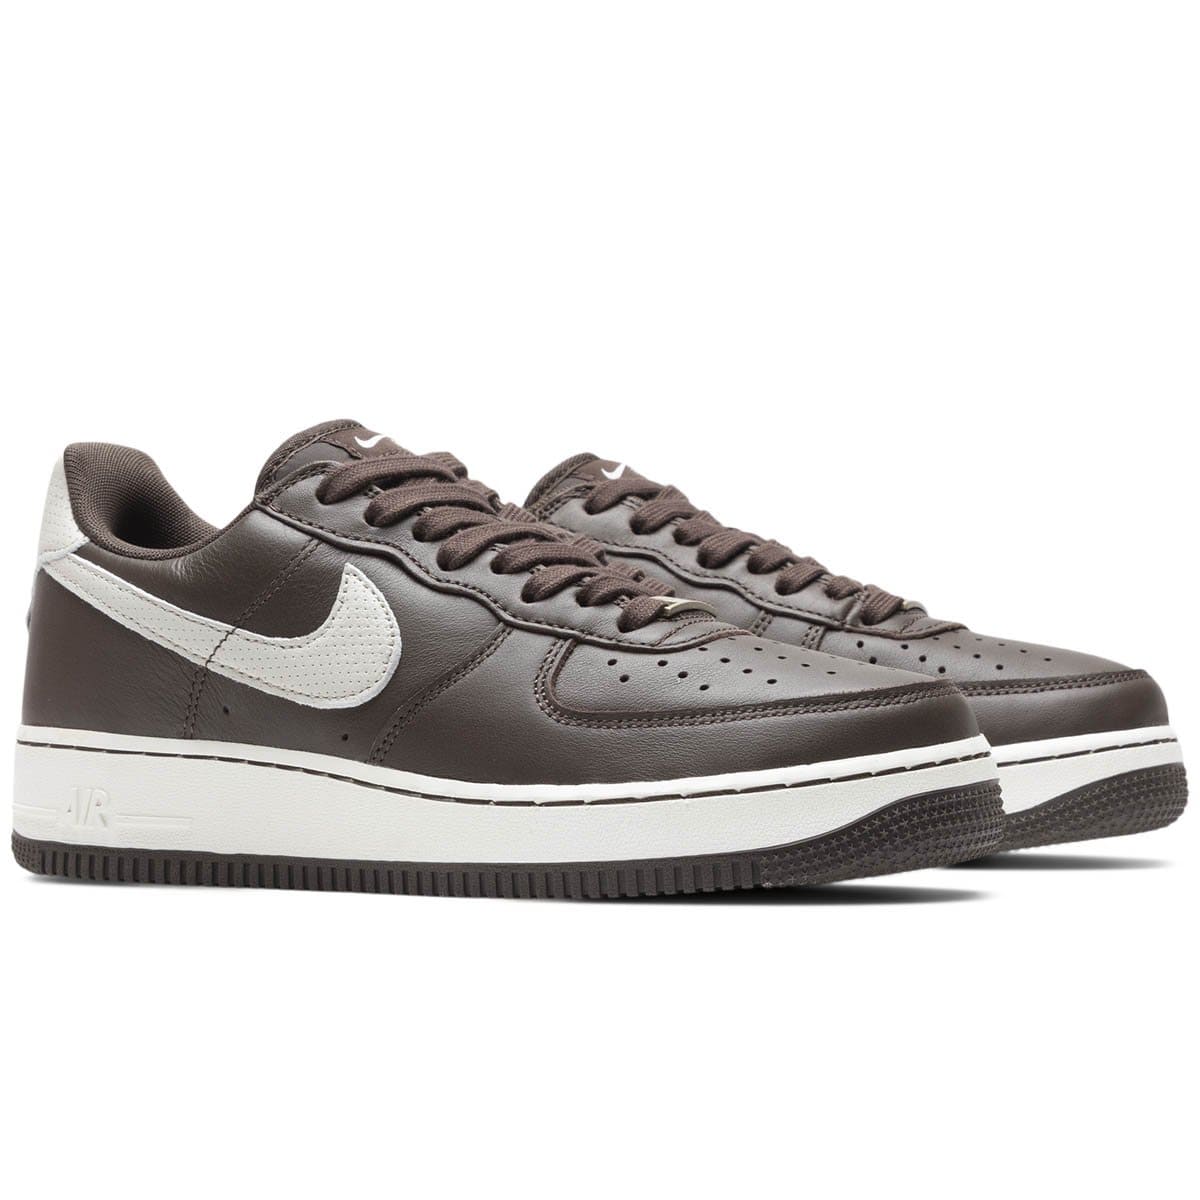 Nike Casual AIR FORCE 1 '07 CRAFT